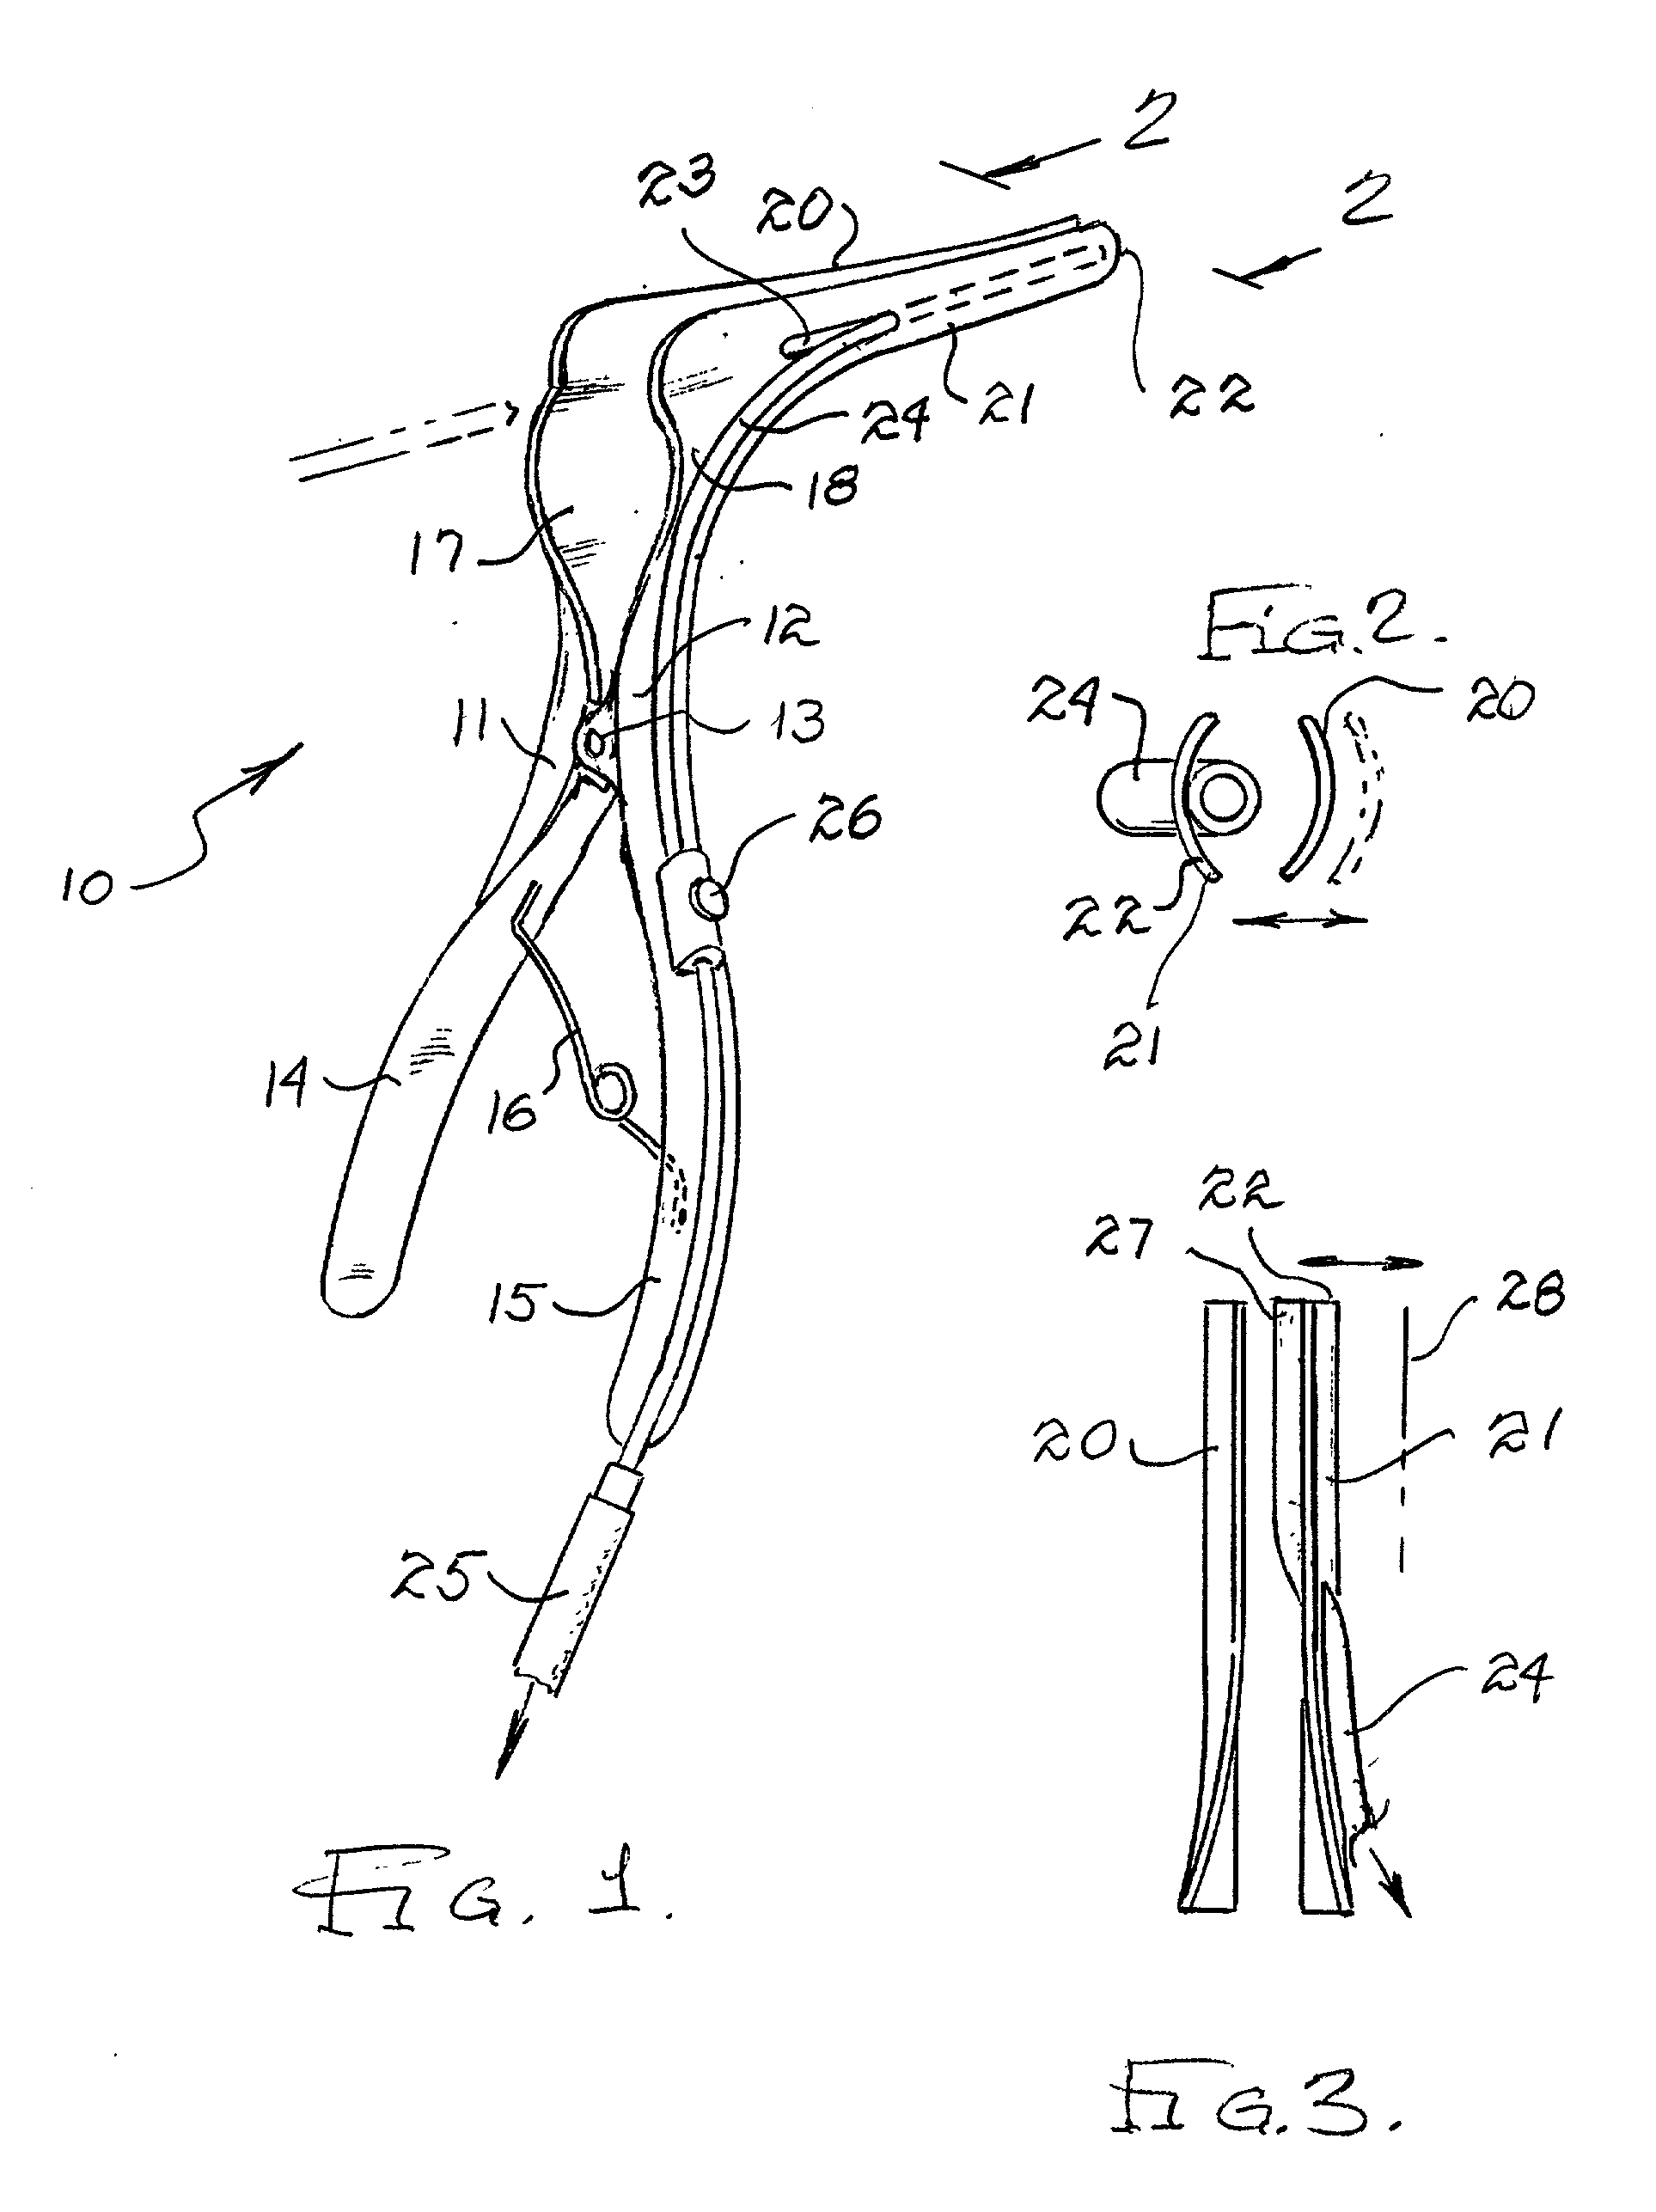 Combined nasal speculum and aspirator